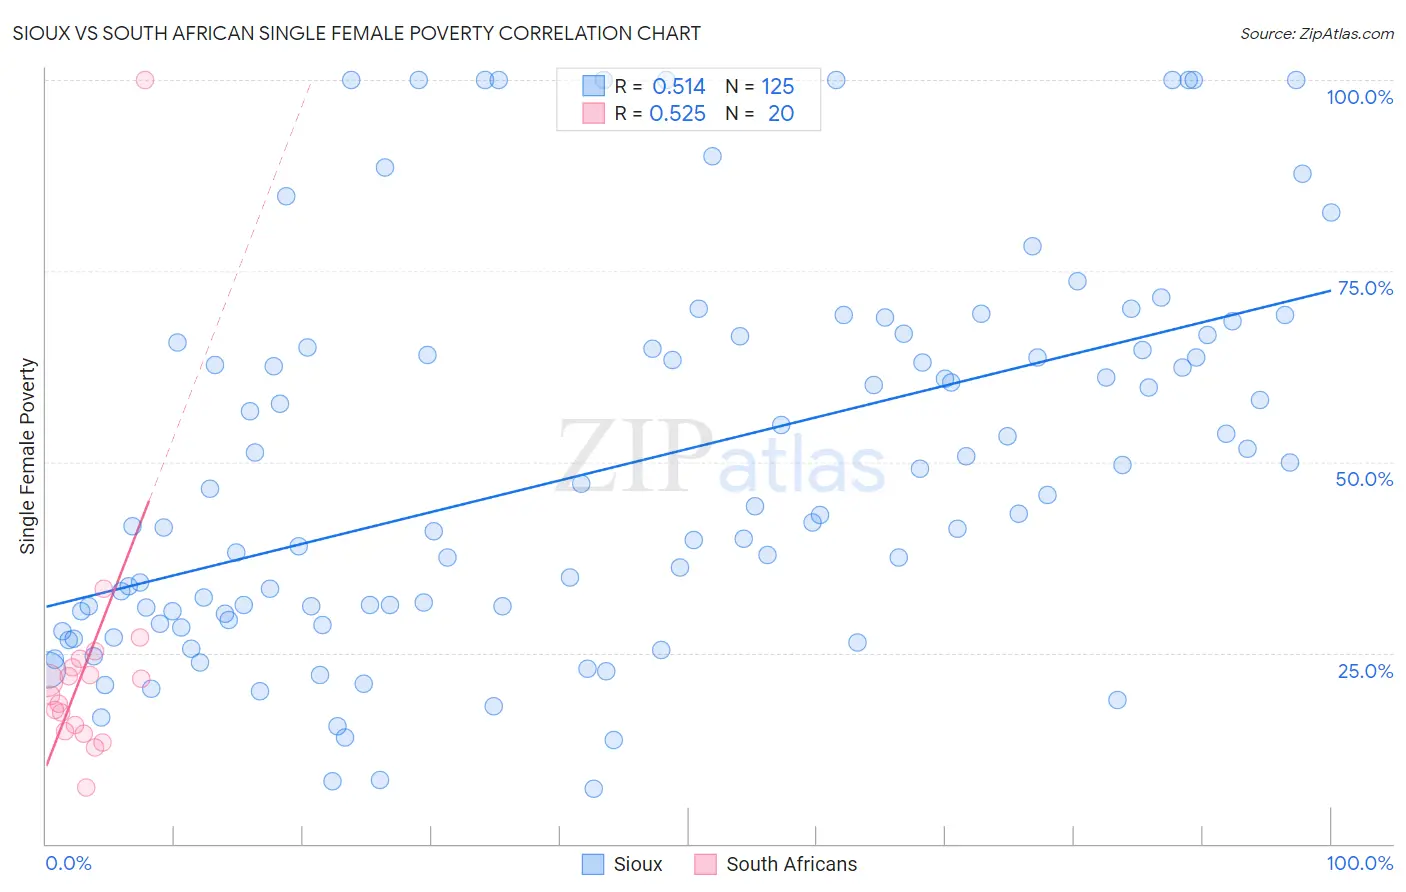 Sioux vs South African Single Female Poverty